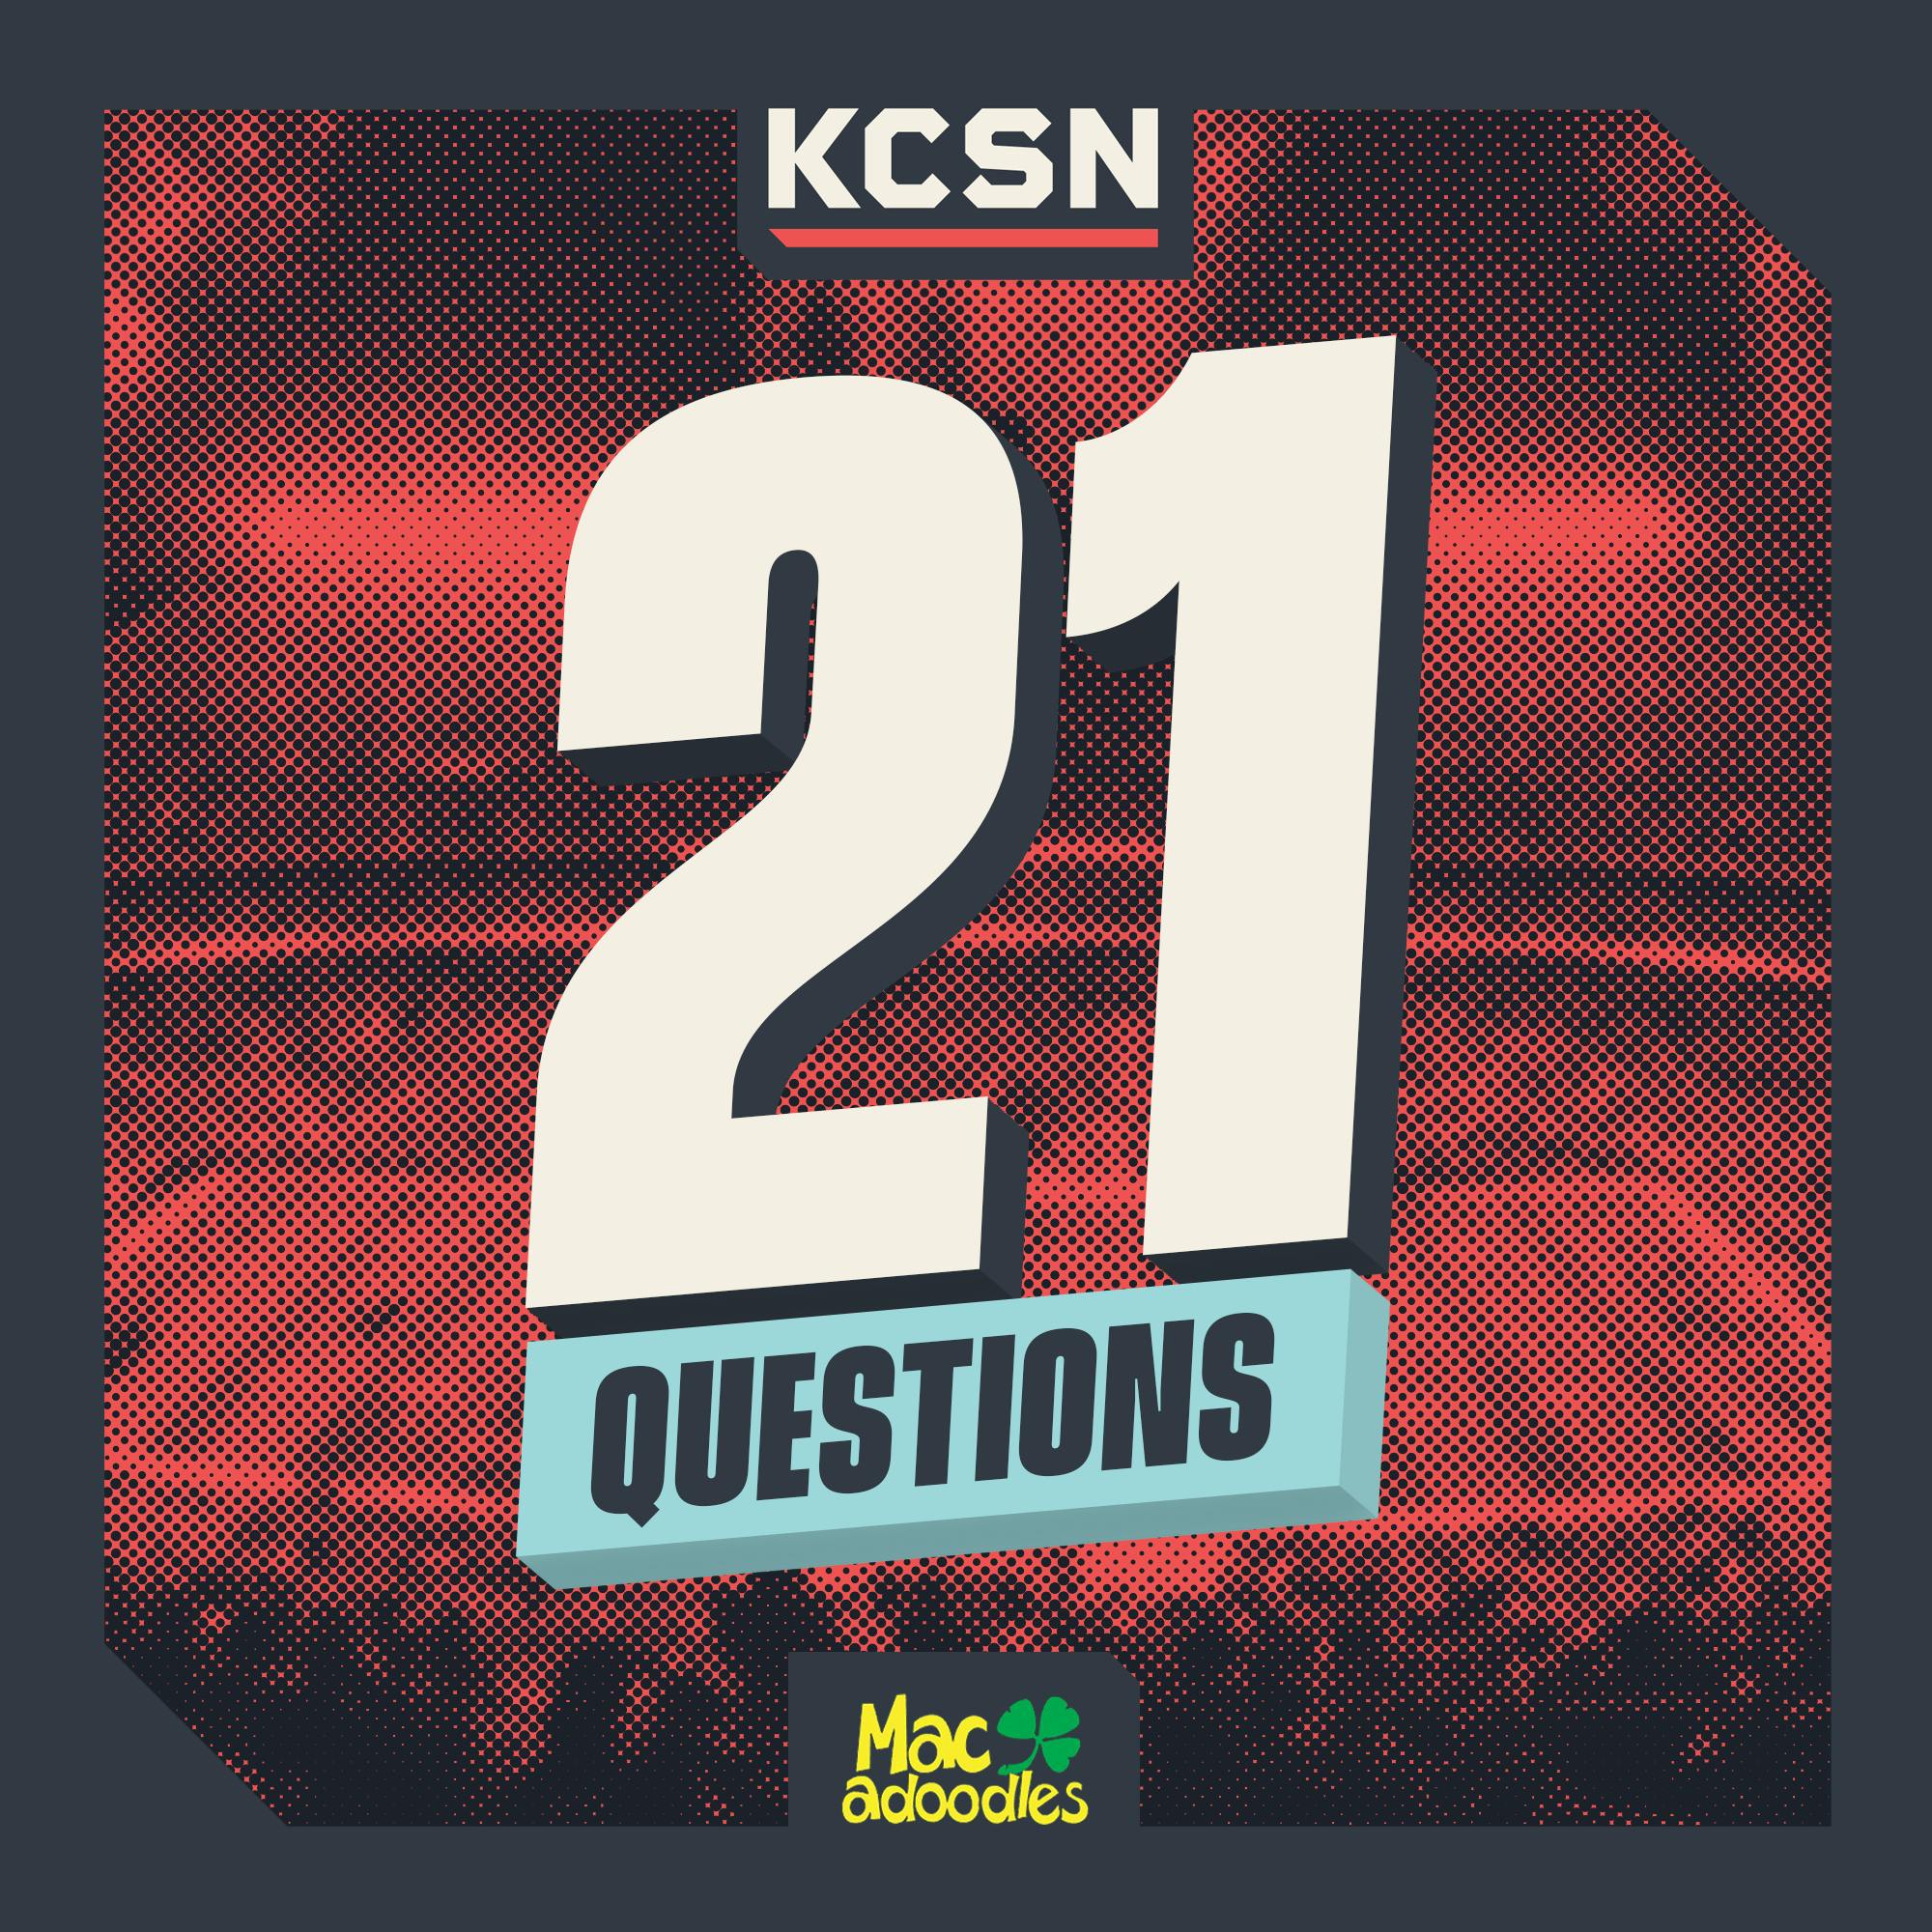 21 Questions 4/17: What is the Theme of the Chiefs' Offseason Thus Far?